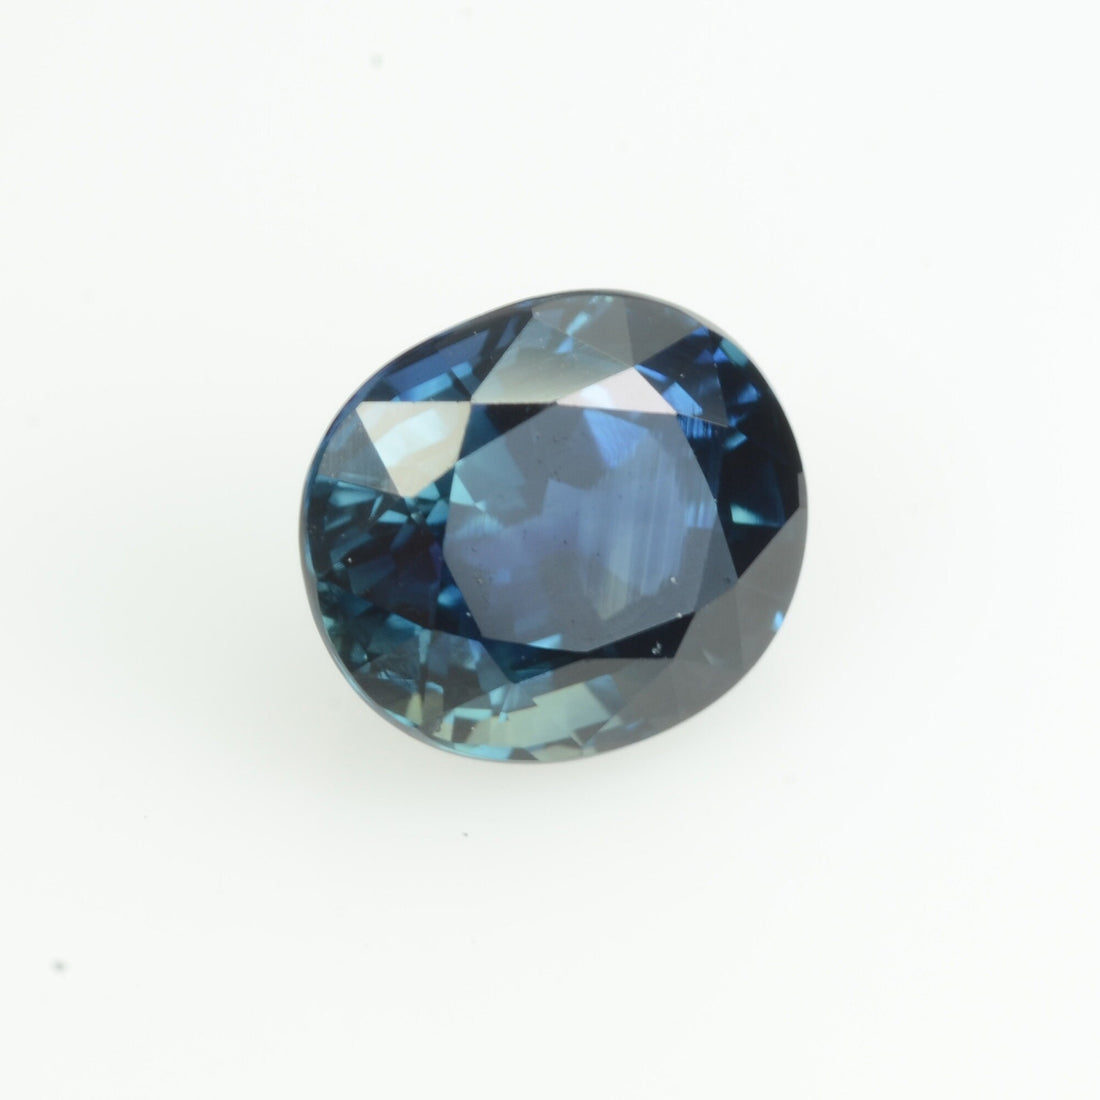 1.19 cts Natural Teal Blue Sapphire Loose Gemstone Oval Cut